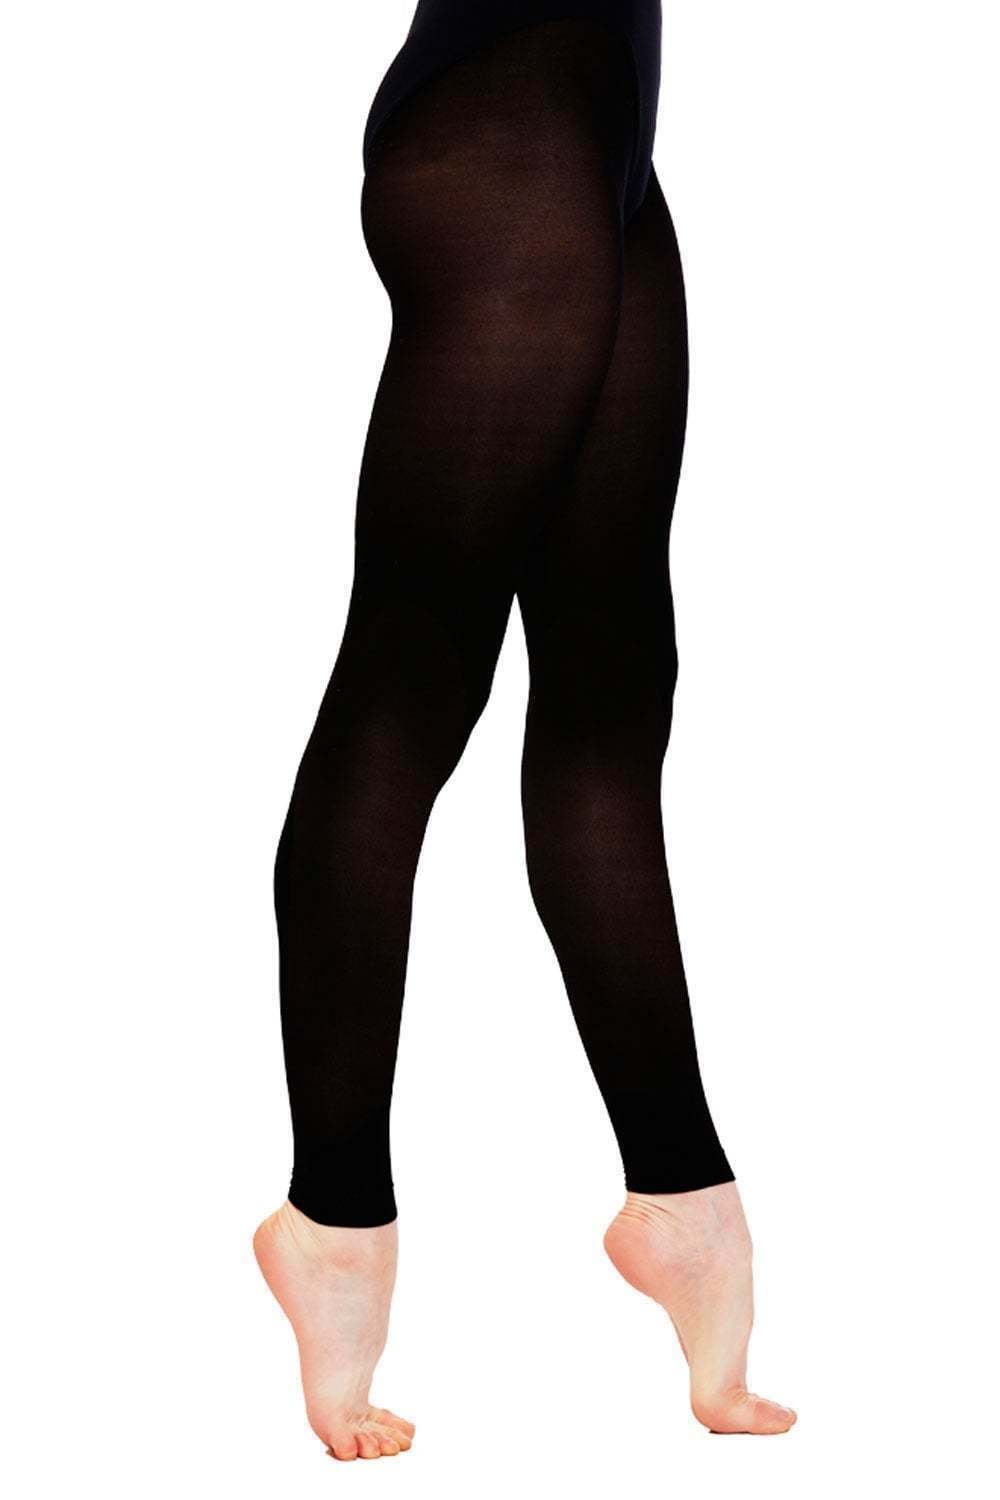 CHILDRENS GIRLS SILKY FOOTLESS DANCE TIGHTS IN BLACK – Hamtons Direct